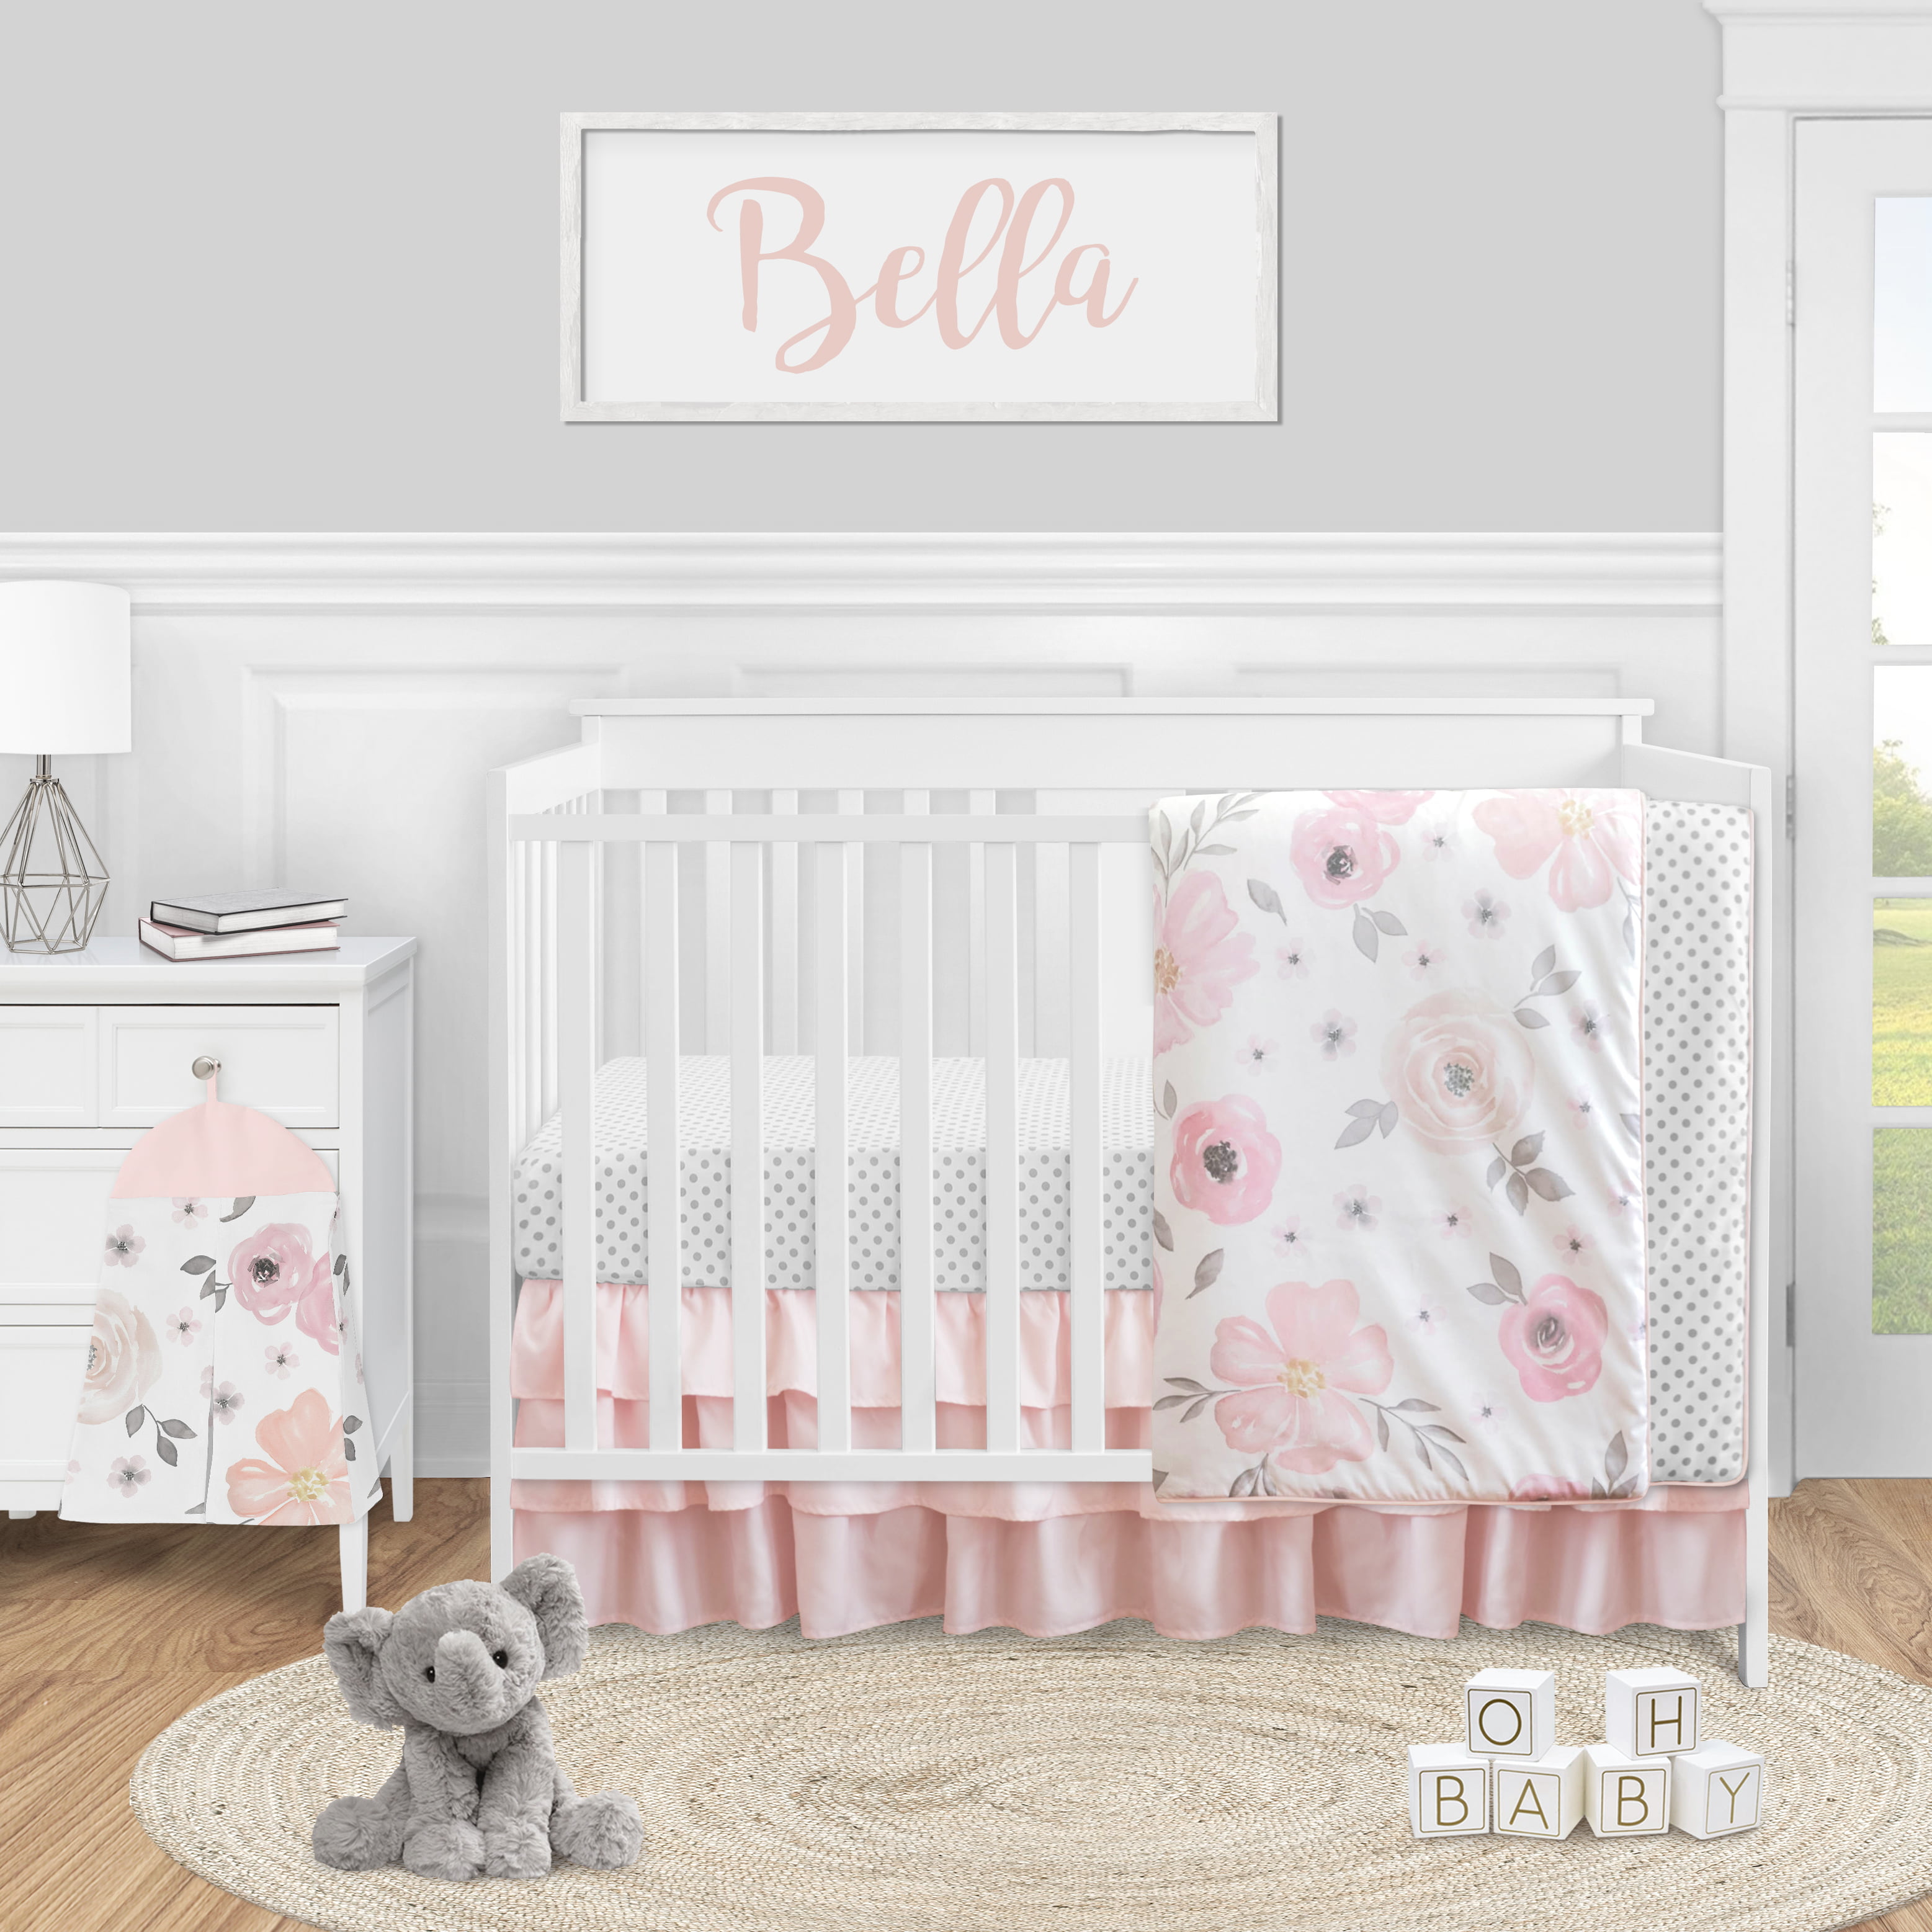 Pink Butterfly Nursery Crib Bedding Set for Baby Girl 6 PCs Set Baby Bedding Set Hand Sew-on//Embroidered Crib Bedding Set Baby Girl Gift Idea